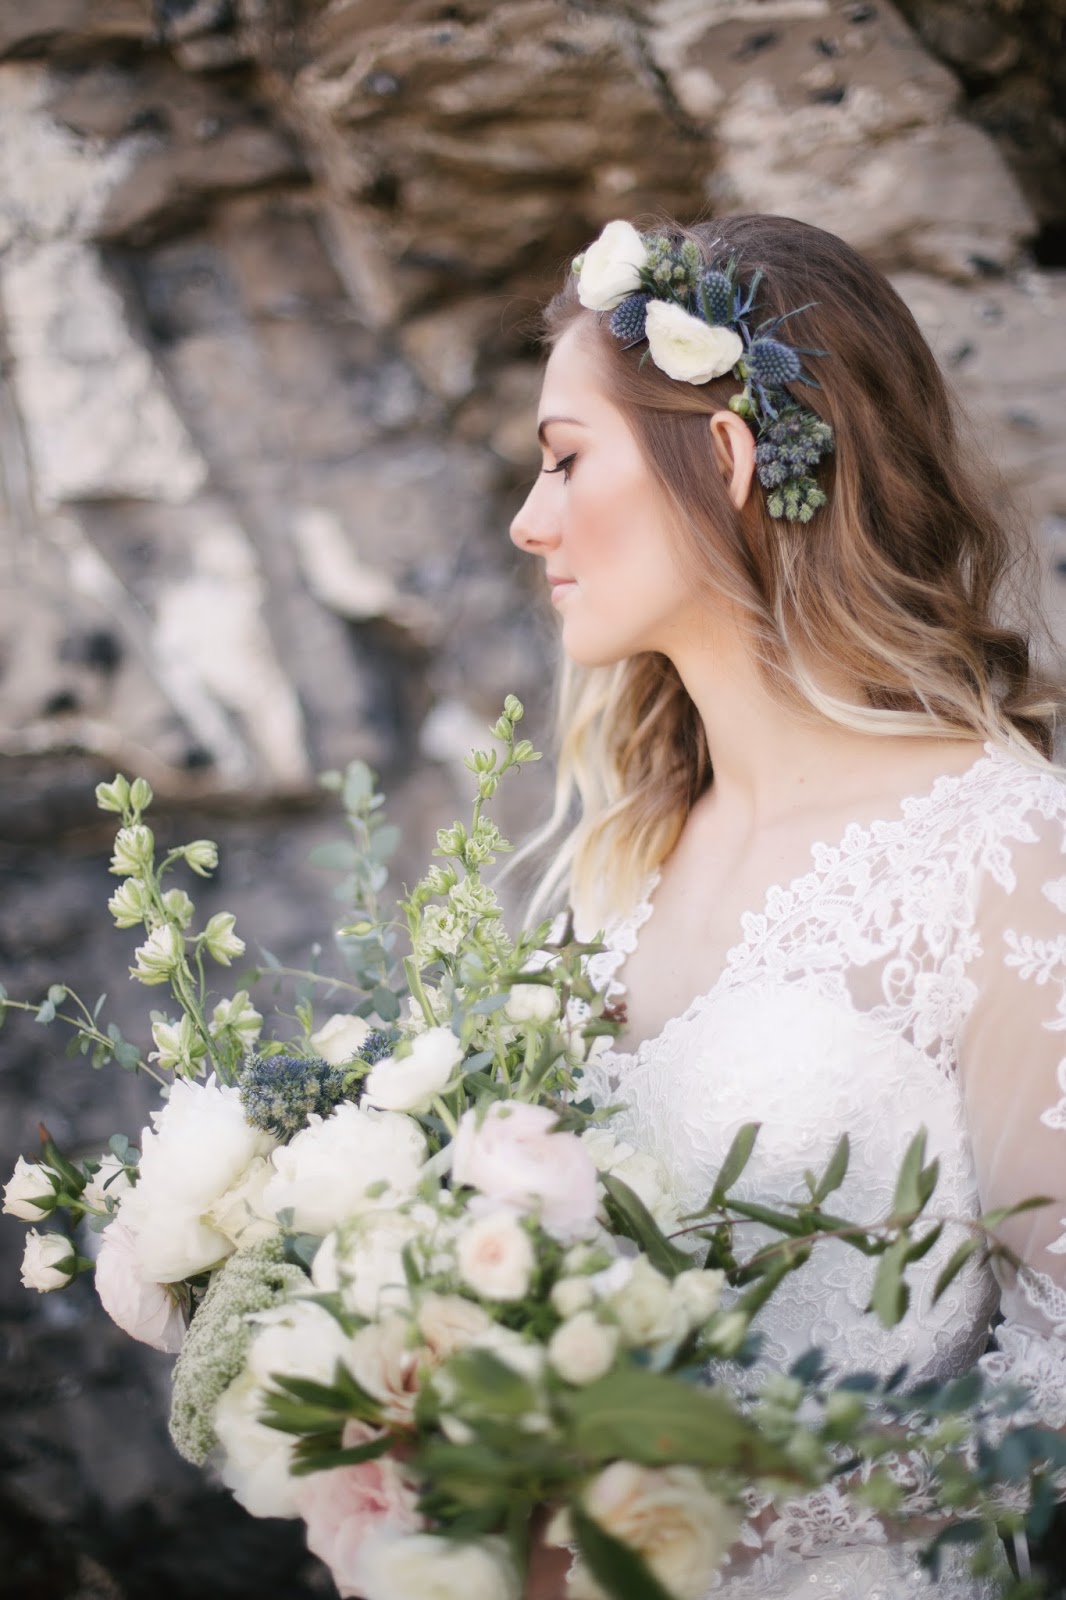 AMBER REVERIE floral and event design: Featured on Green Wedding Shoes ...